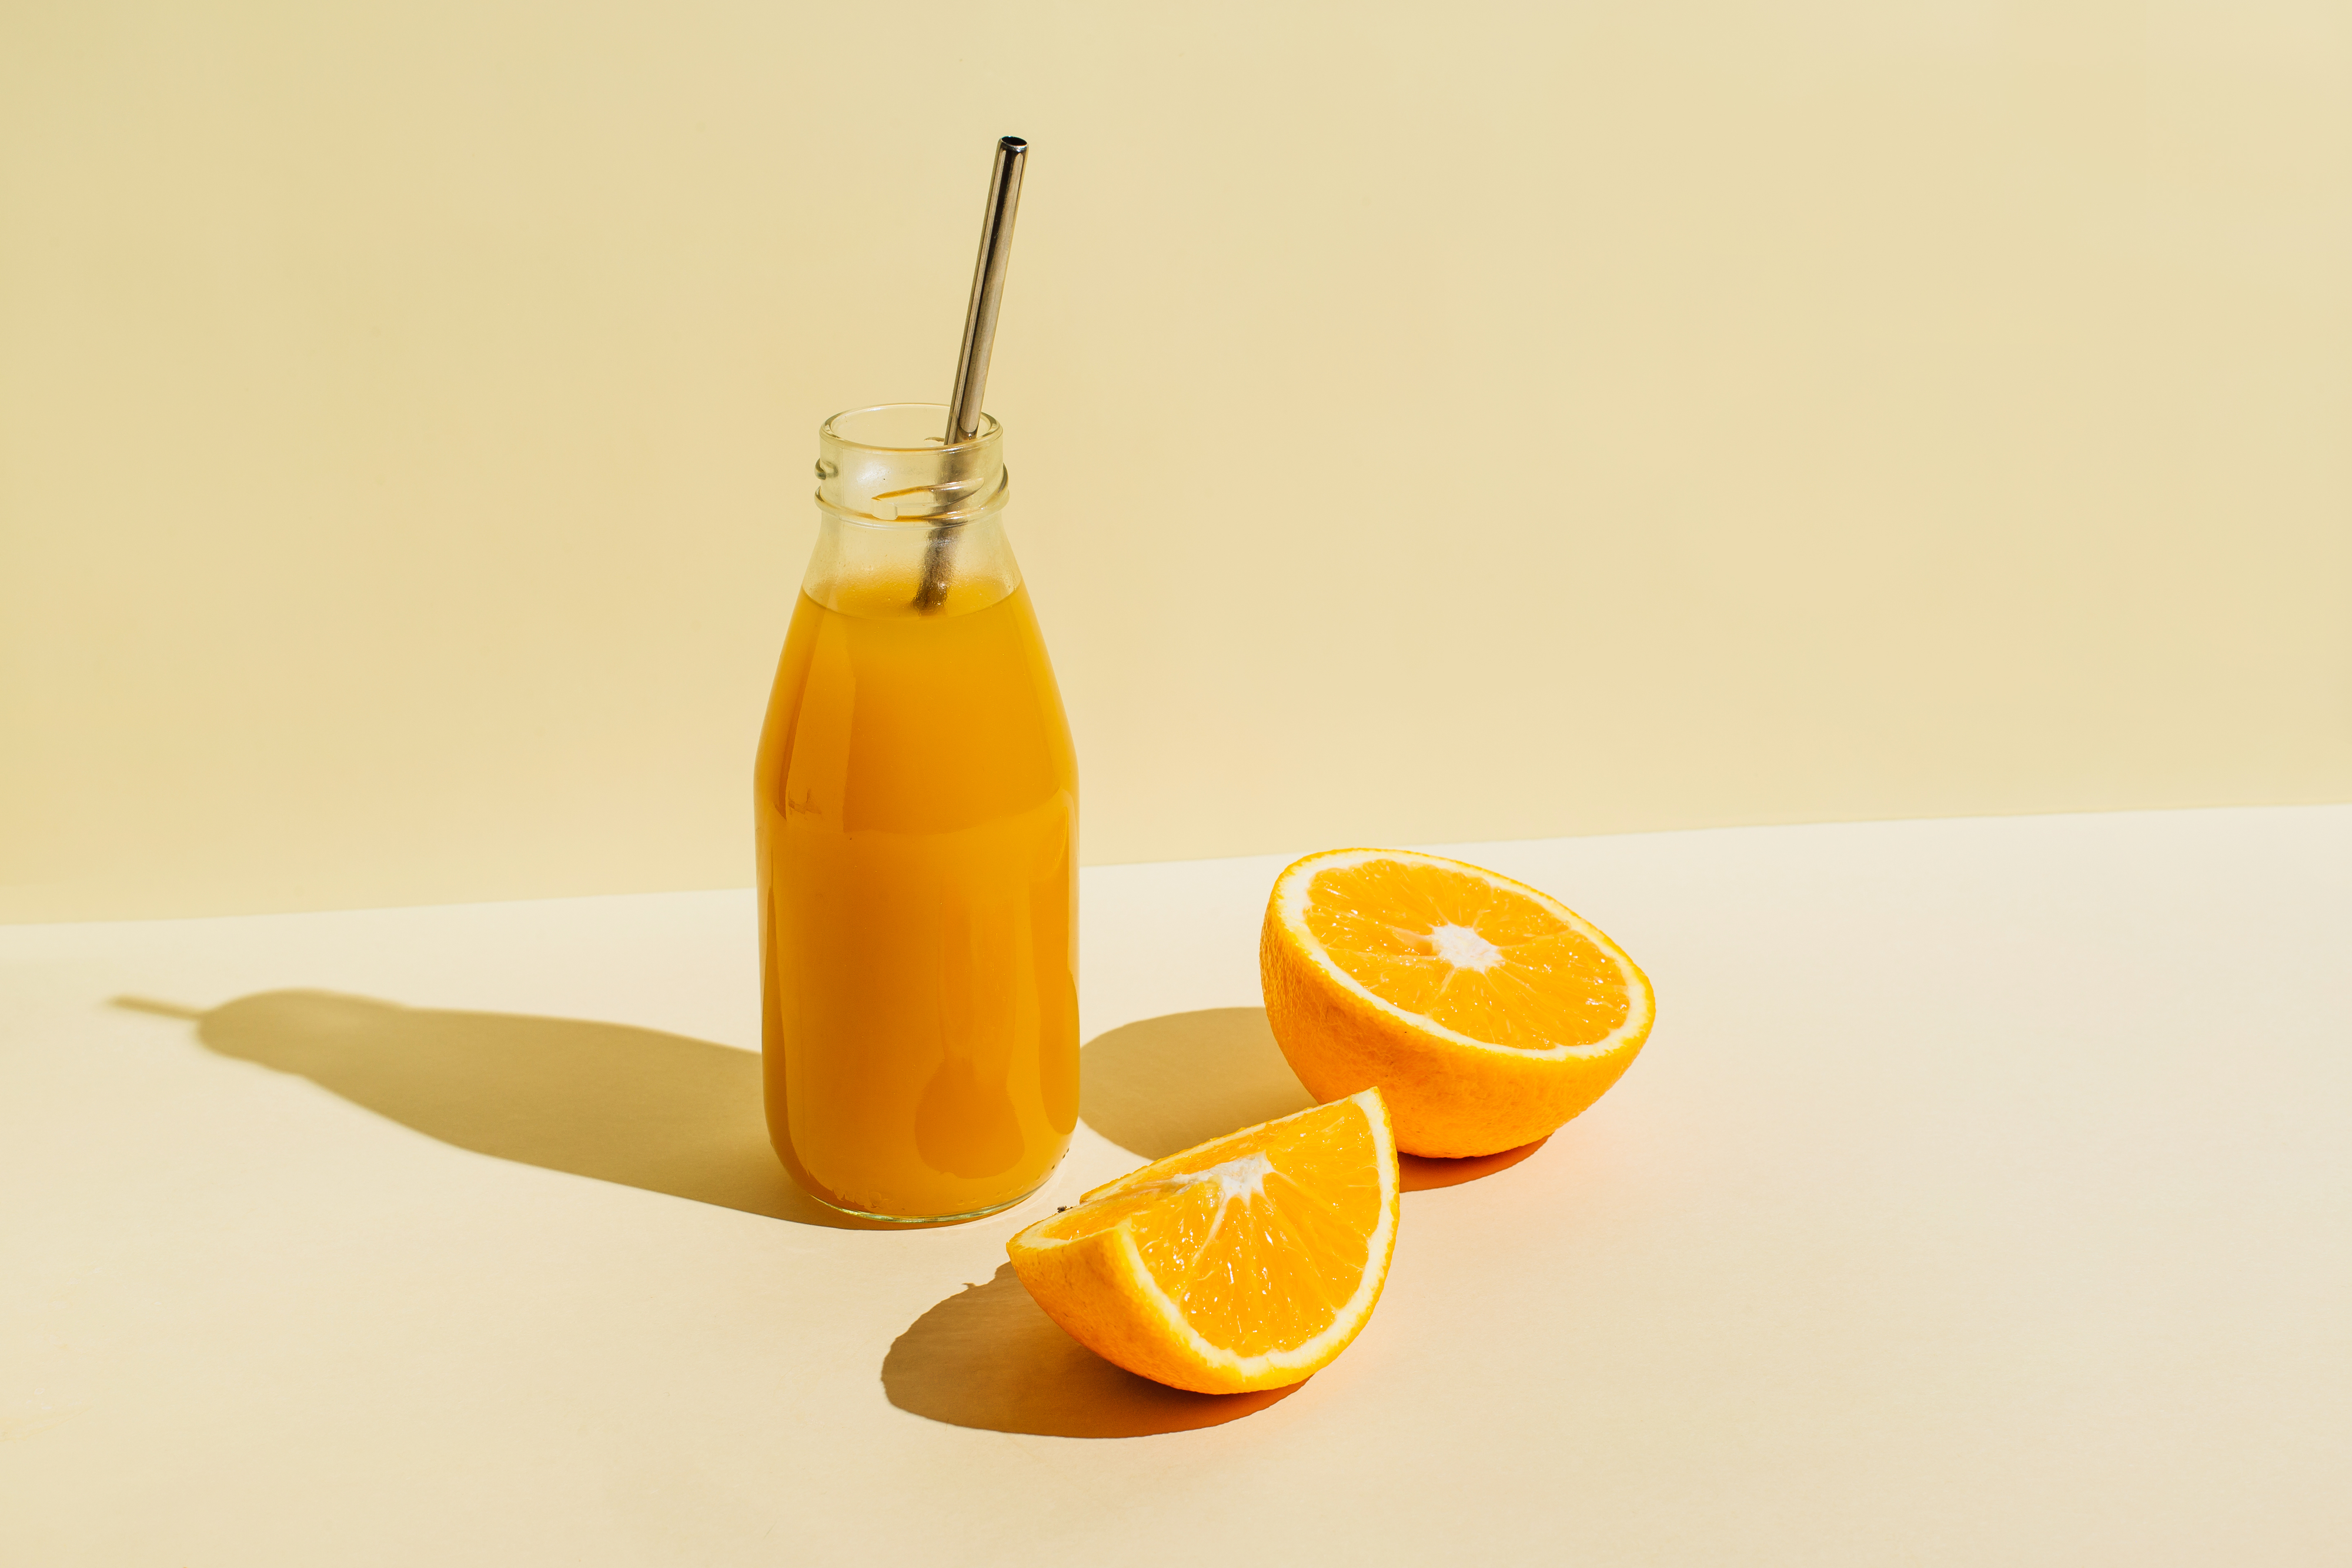 Bottle filled with an orange beverage with a metal straw next to halved oranges on a surface